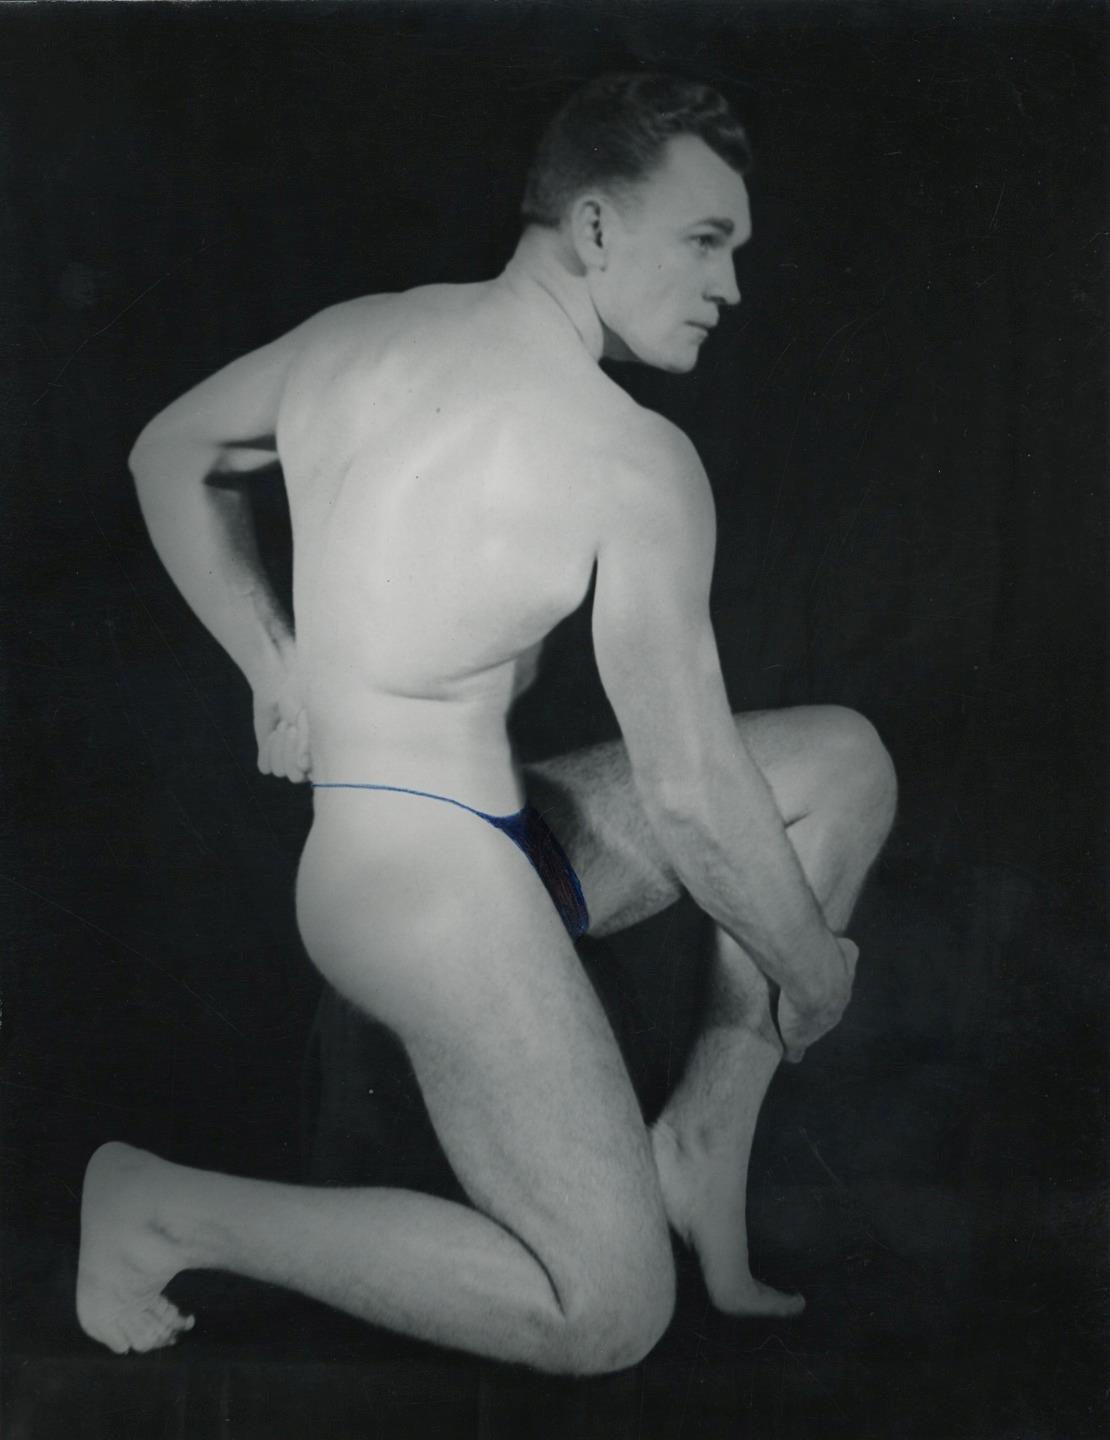 c. 1930\'s James Grabitz Photograph by Earl Forbes GAY BEEFCAKE